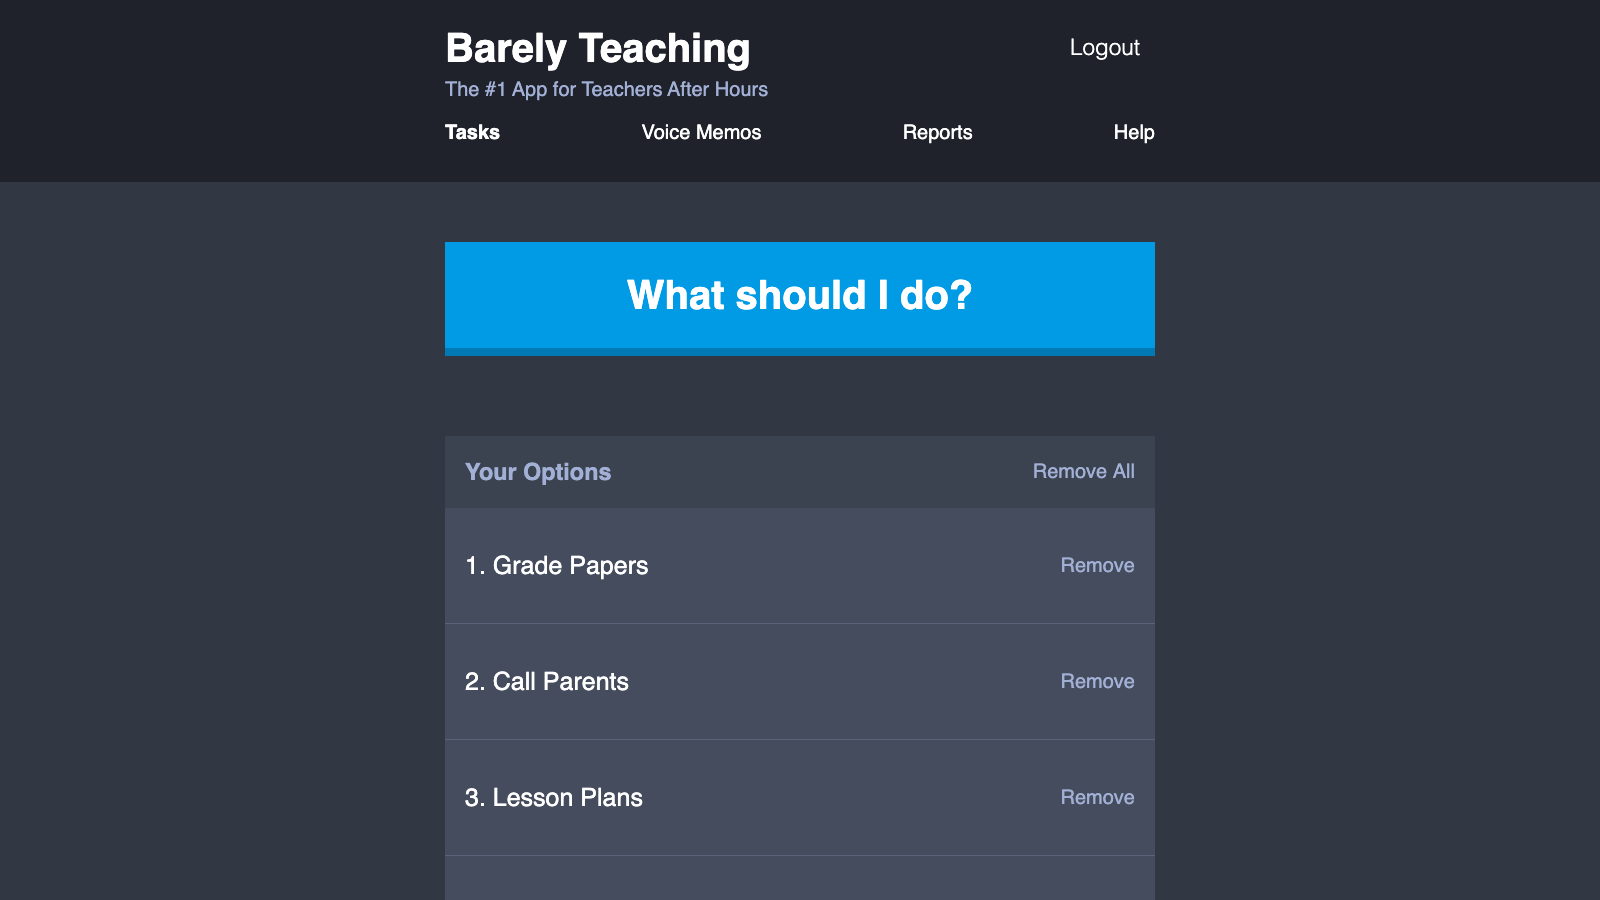 Sceenshot of Barely Teaching tasks page